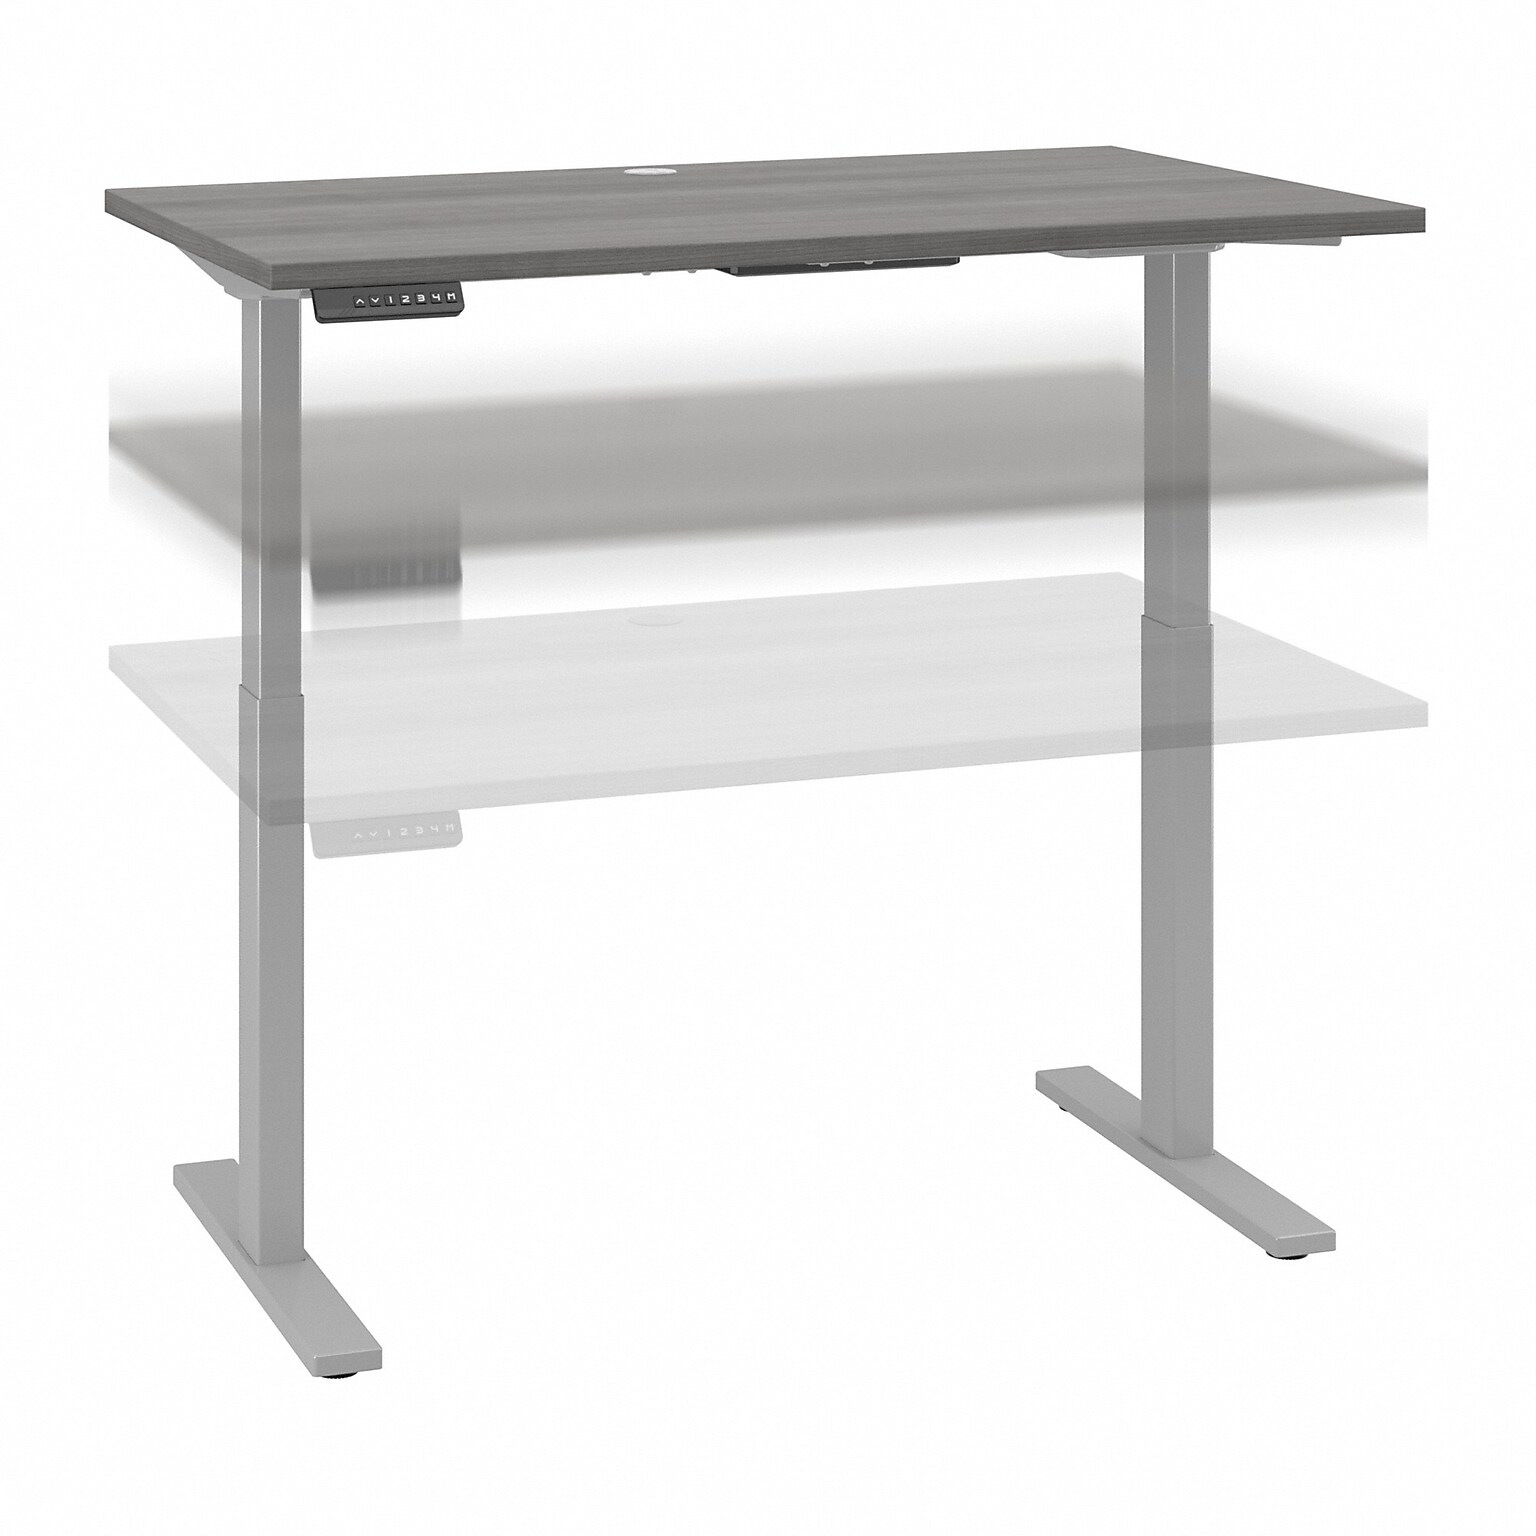 Bush Business Furniture Move 60 Series 48W Electric Height Adjustable Standing Desk, Platinum Gray/Cool Gray (M6S4824PGSK)